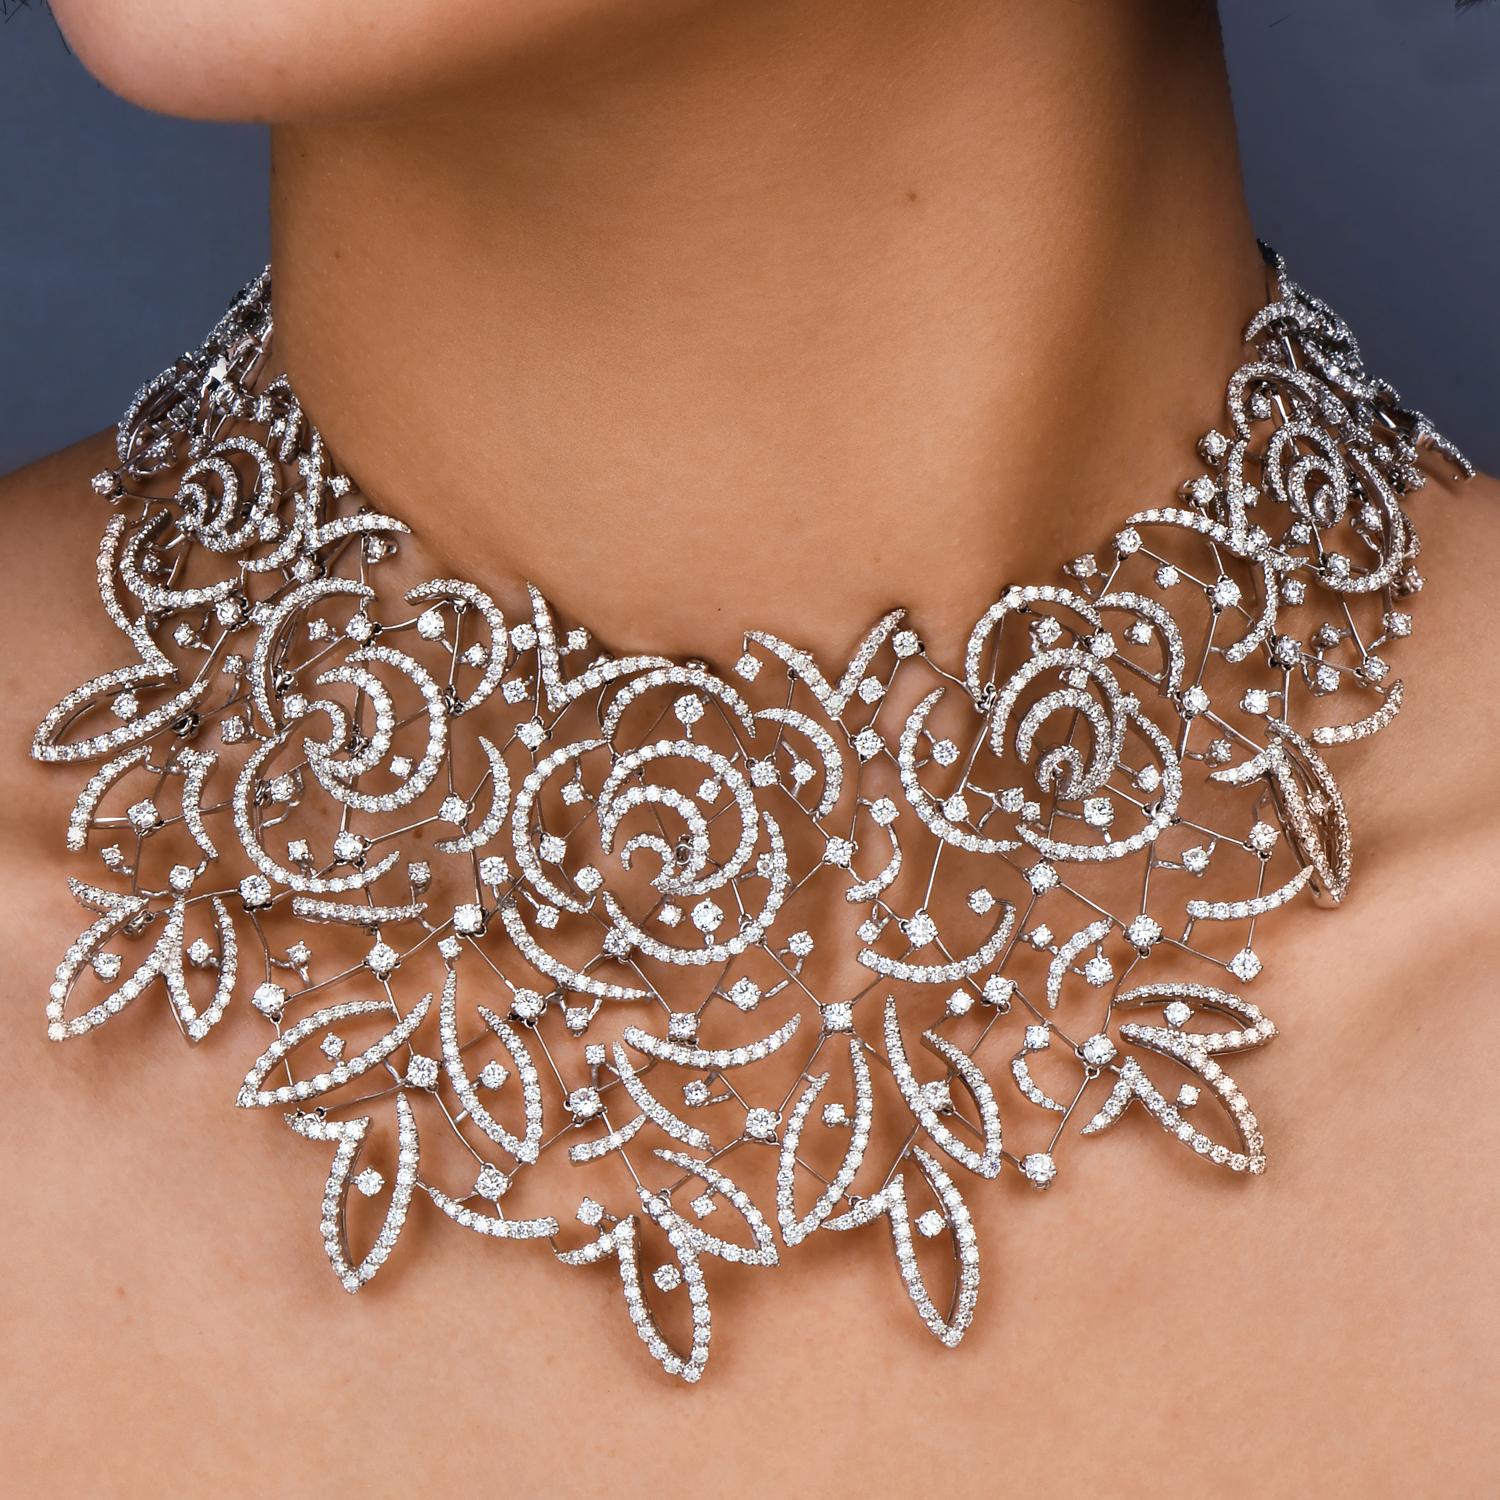 Wear this necklace for that special event. presented by Stefan Hafner, crafted in solid 18K white gold. Meticulously executed exposing an immaculately rendered floral lace pattern covered by genuine extra
white round-faceted diamonds of approx.